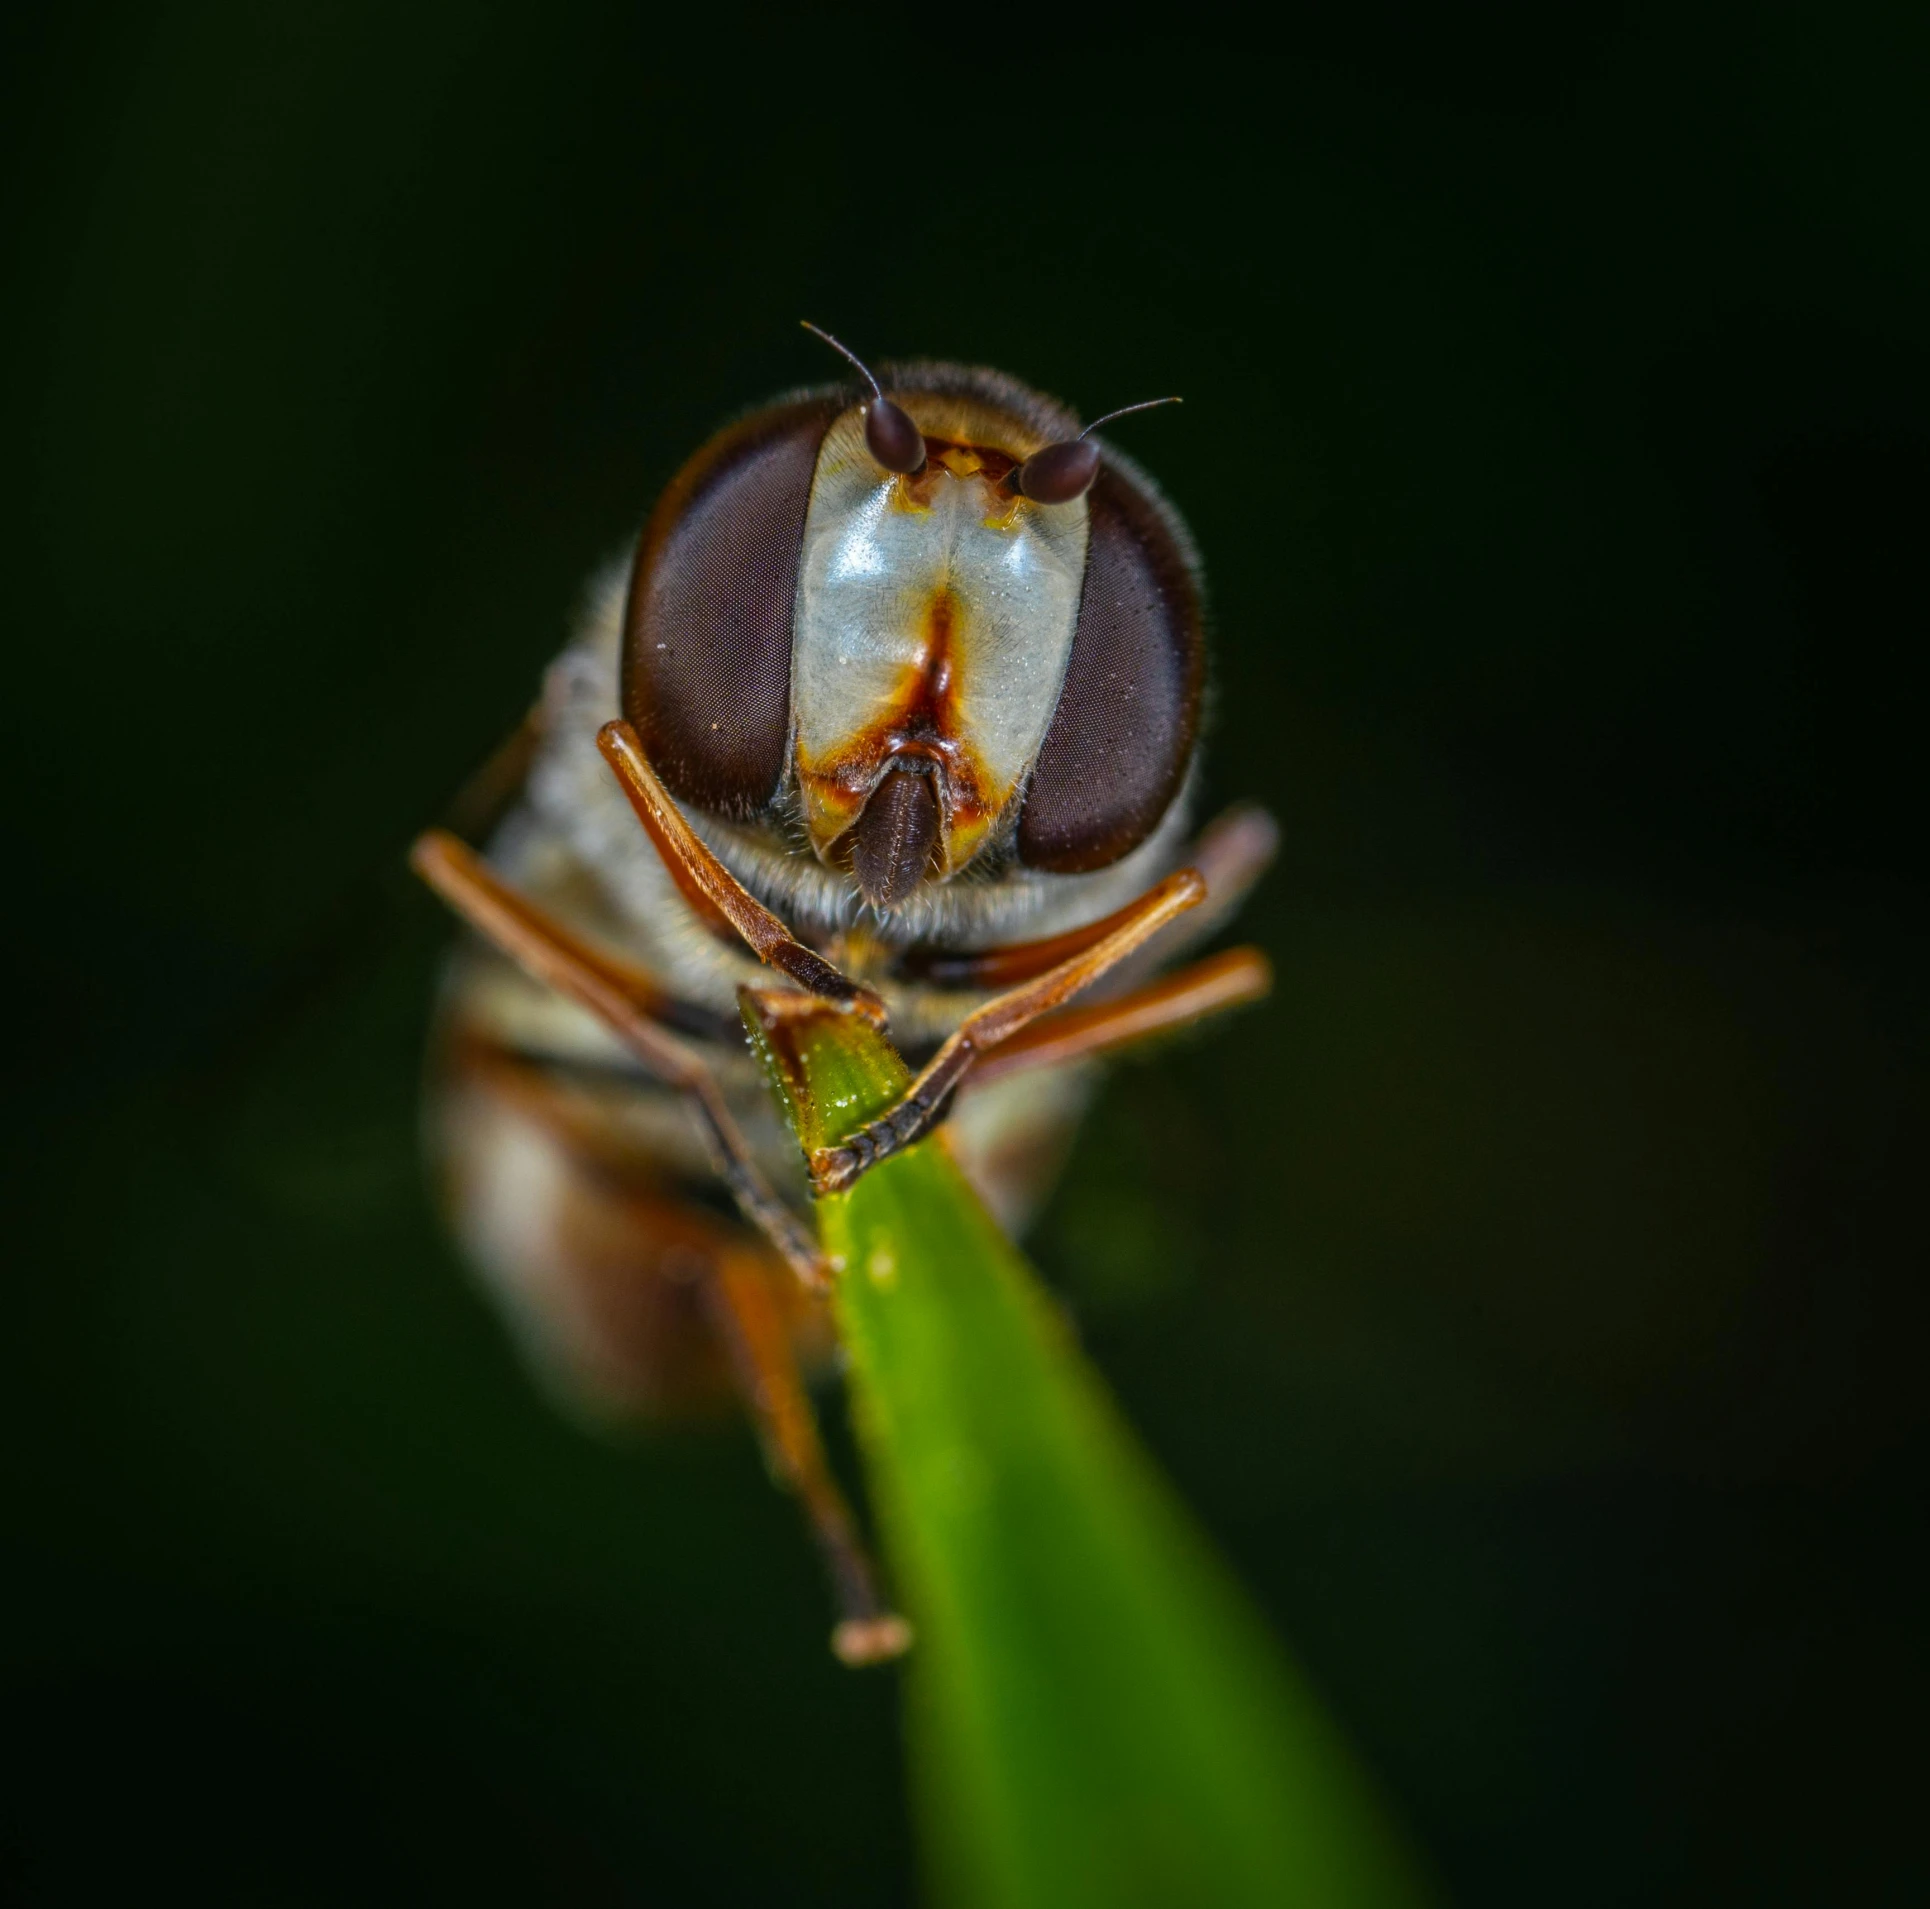 a close up of a fly on a blade of grass, a macro photograph, pexels contest winner, hurufiyya, clear symmetrical face, portrait shot 8 k, photo taken at night, today\'s featured photograph 4k